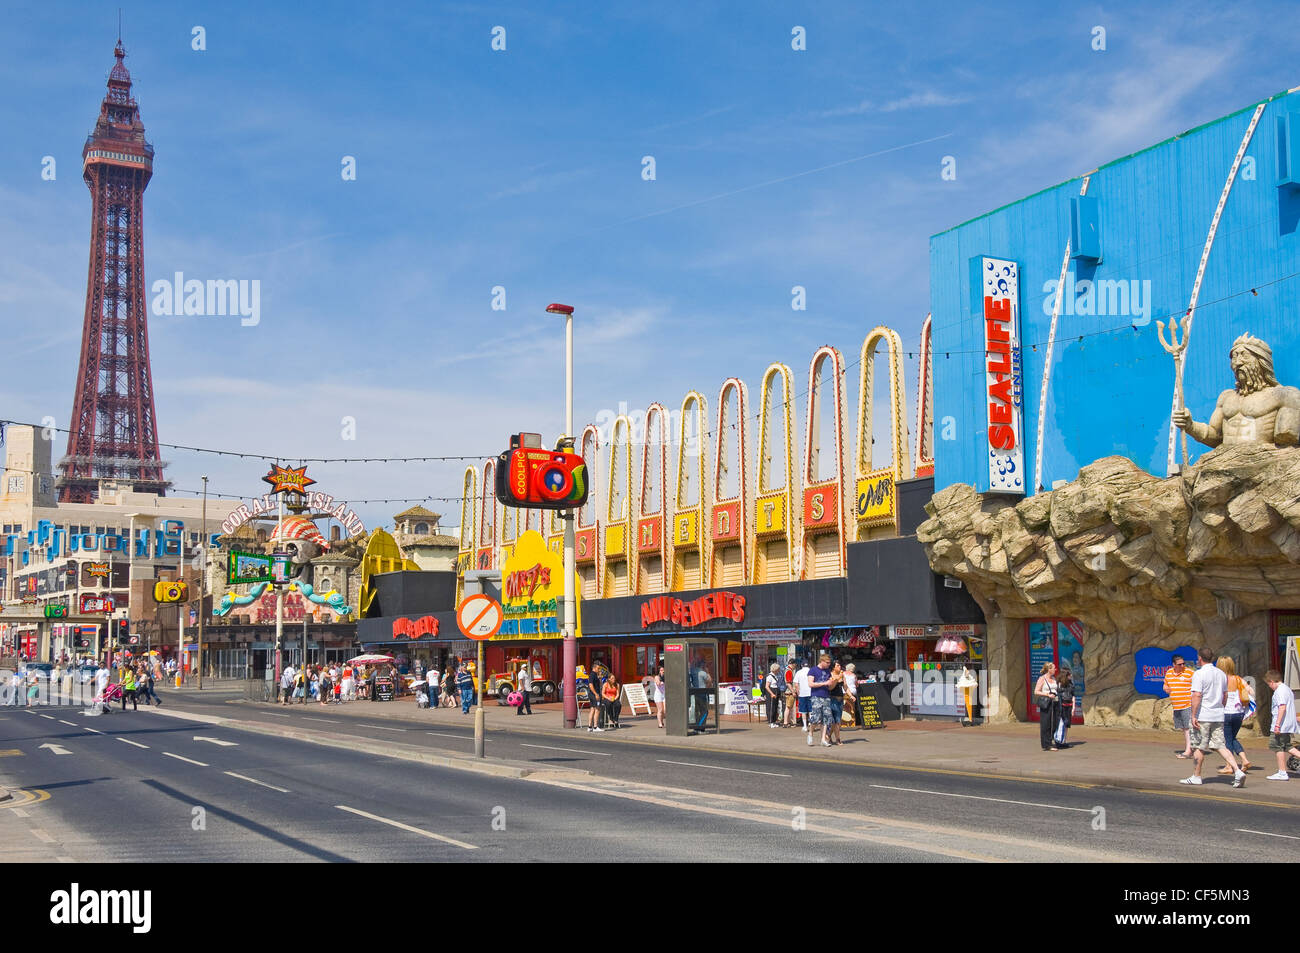 Amusements and tower on the seafront in Blackpool. Stock Photo